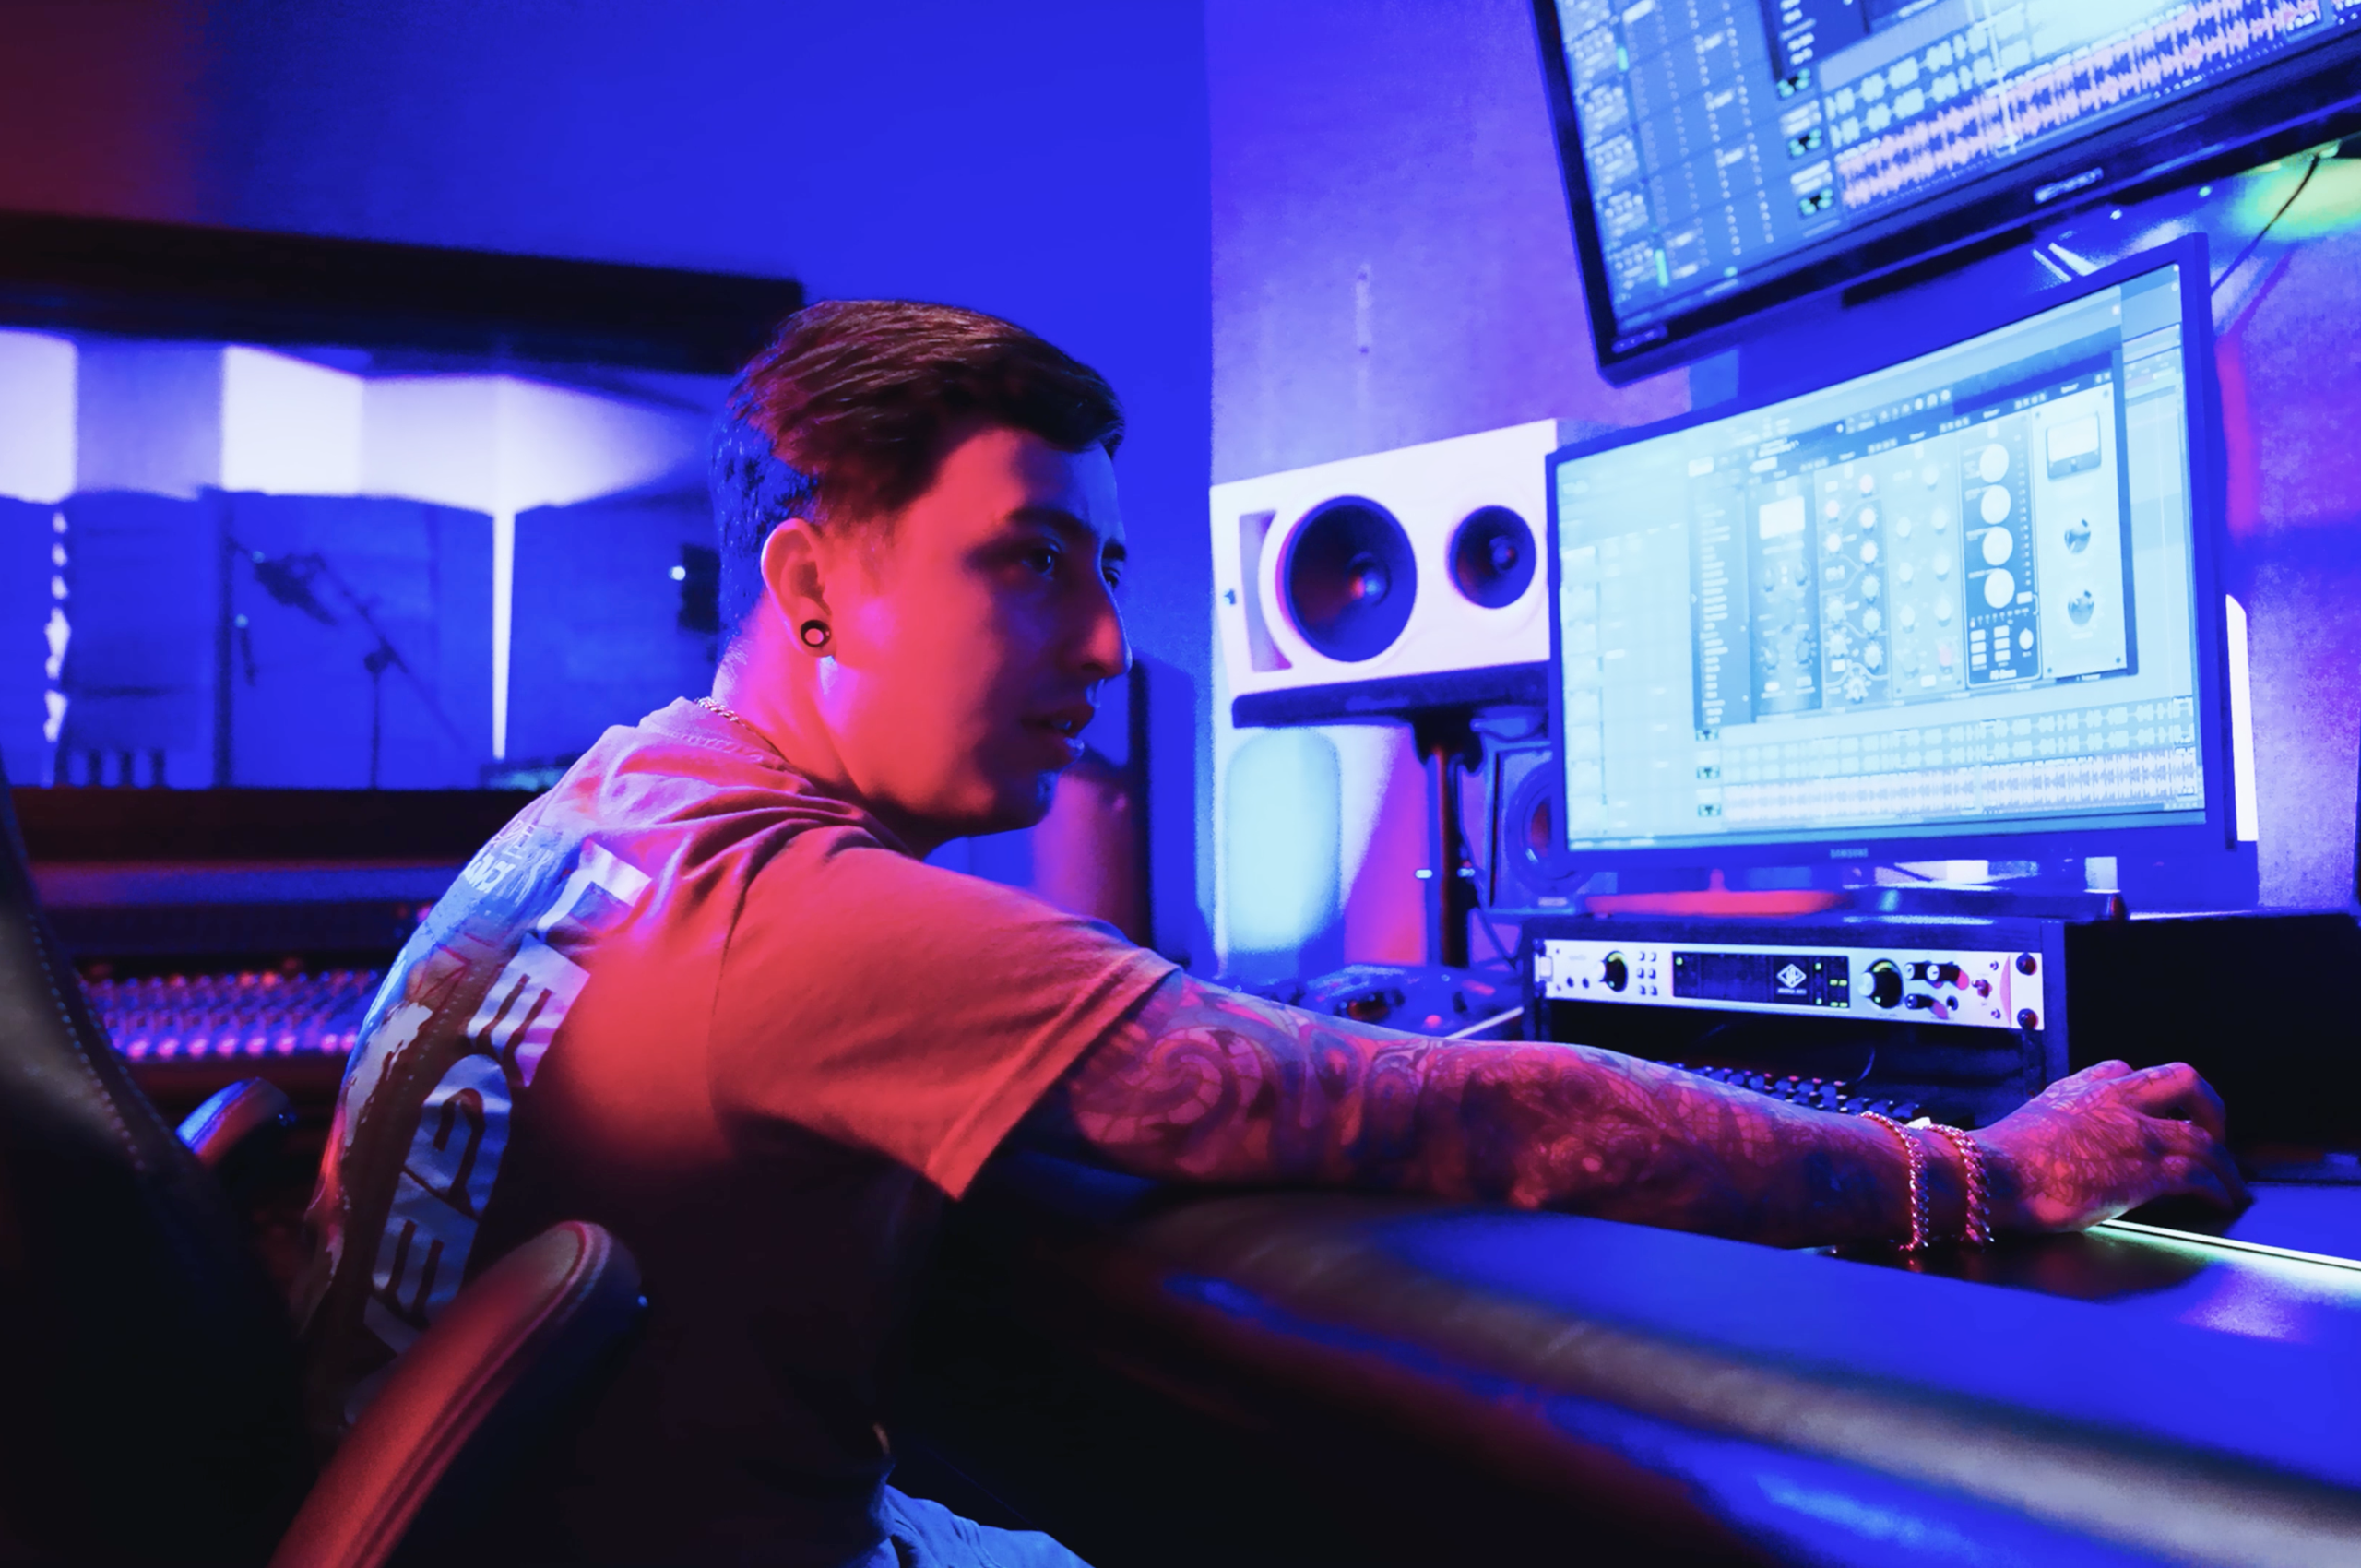 Music mixing & mastering services (in recording studio & online)